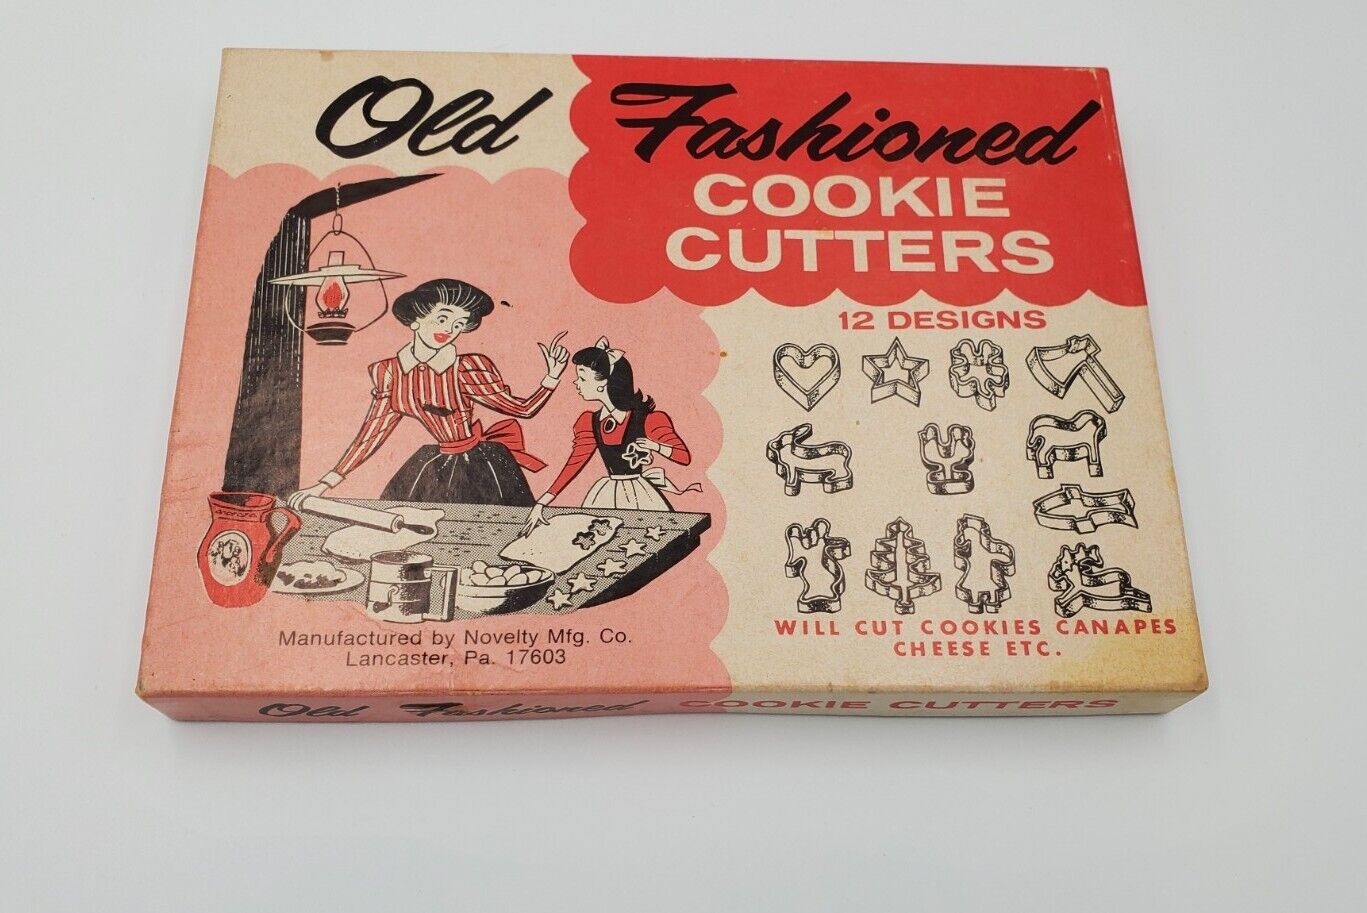 Vintage Old Fashioned Cookie Cutters 12 Designs in Original Box Metal Cutters